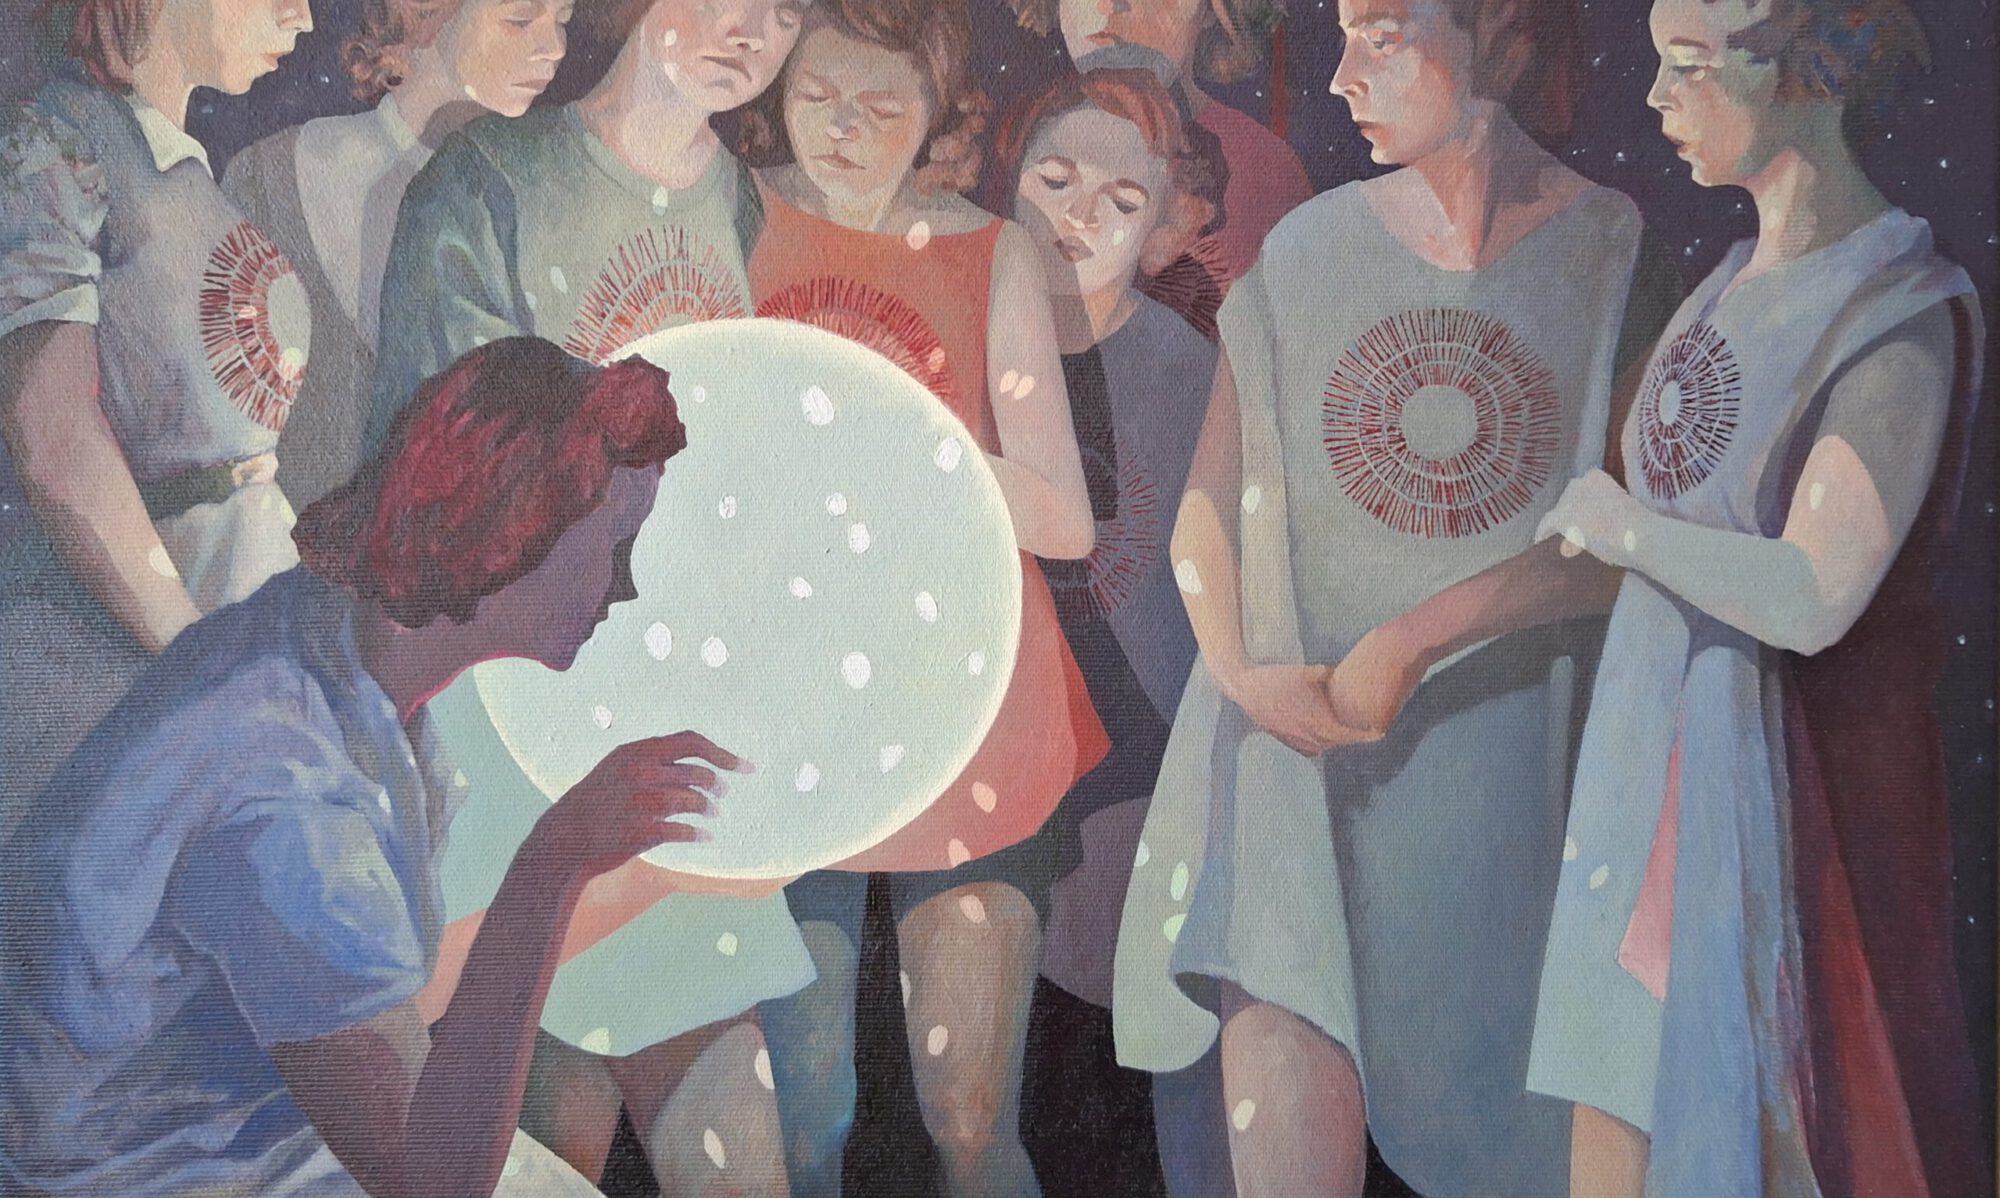 figurative painting showing women around a glowing ball of light